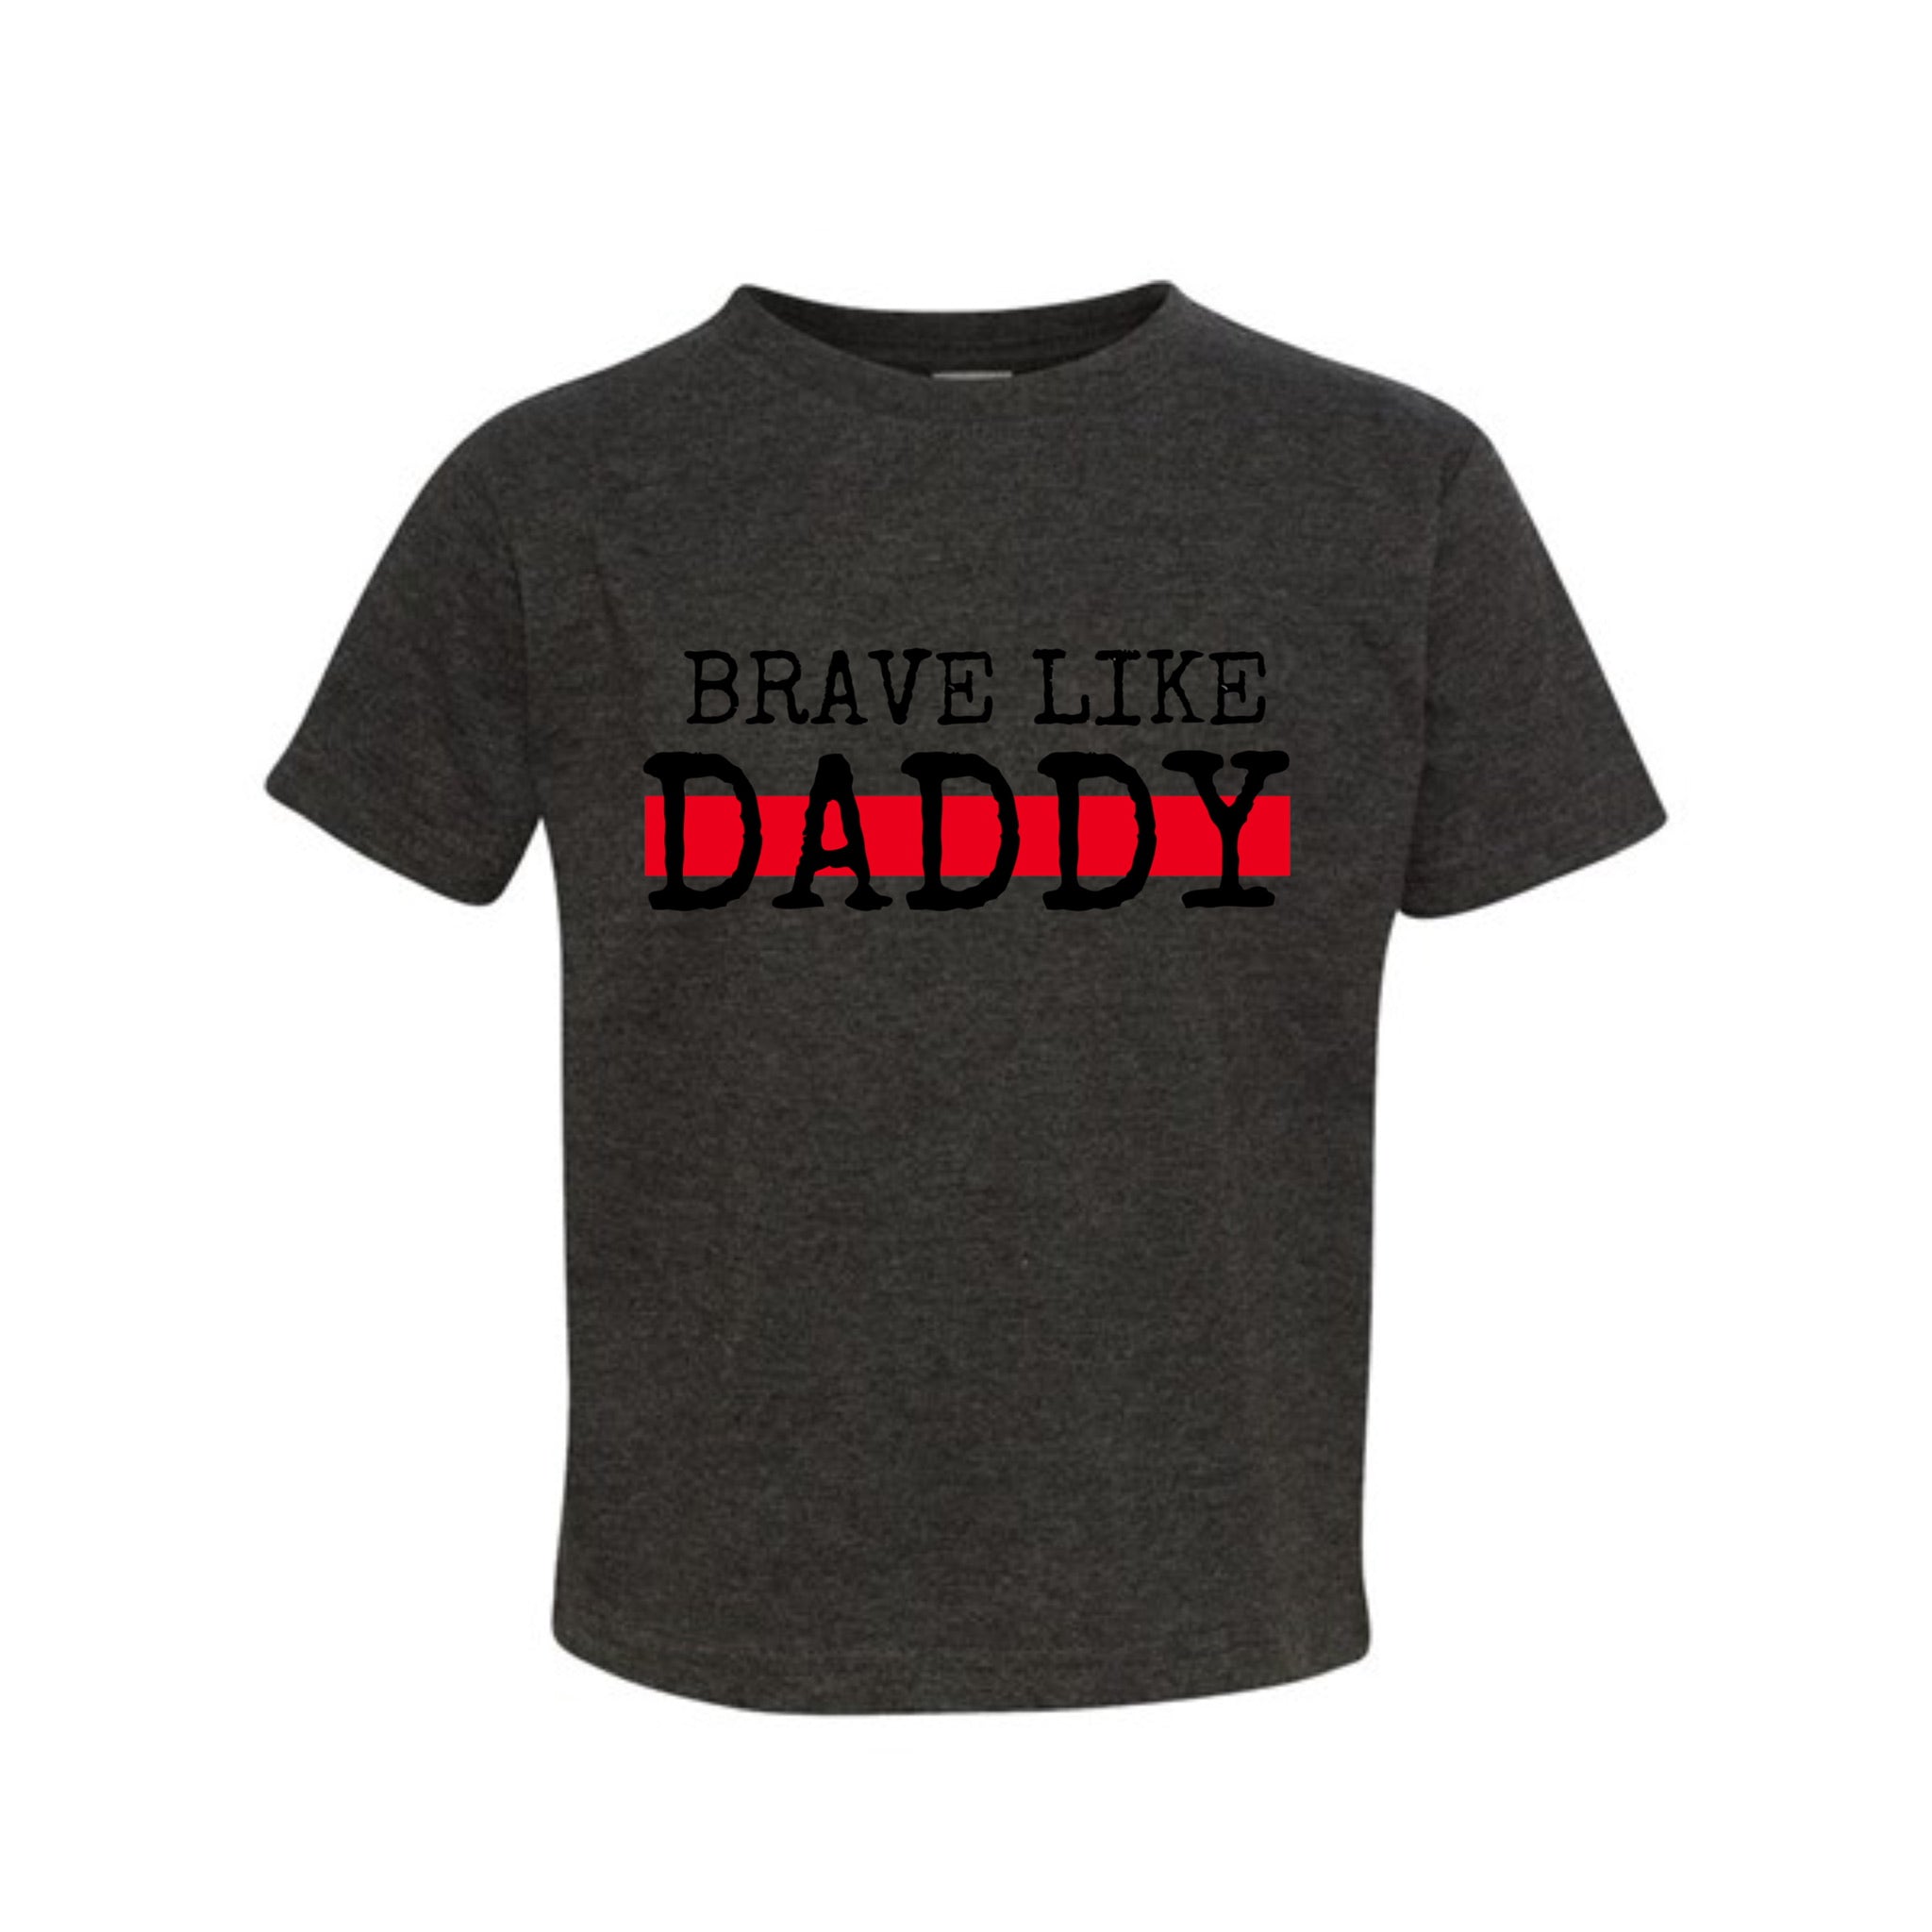 Copy of Brave Like Daddy Toddler